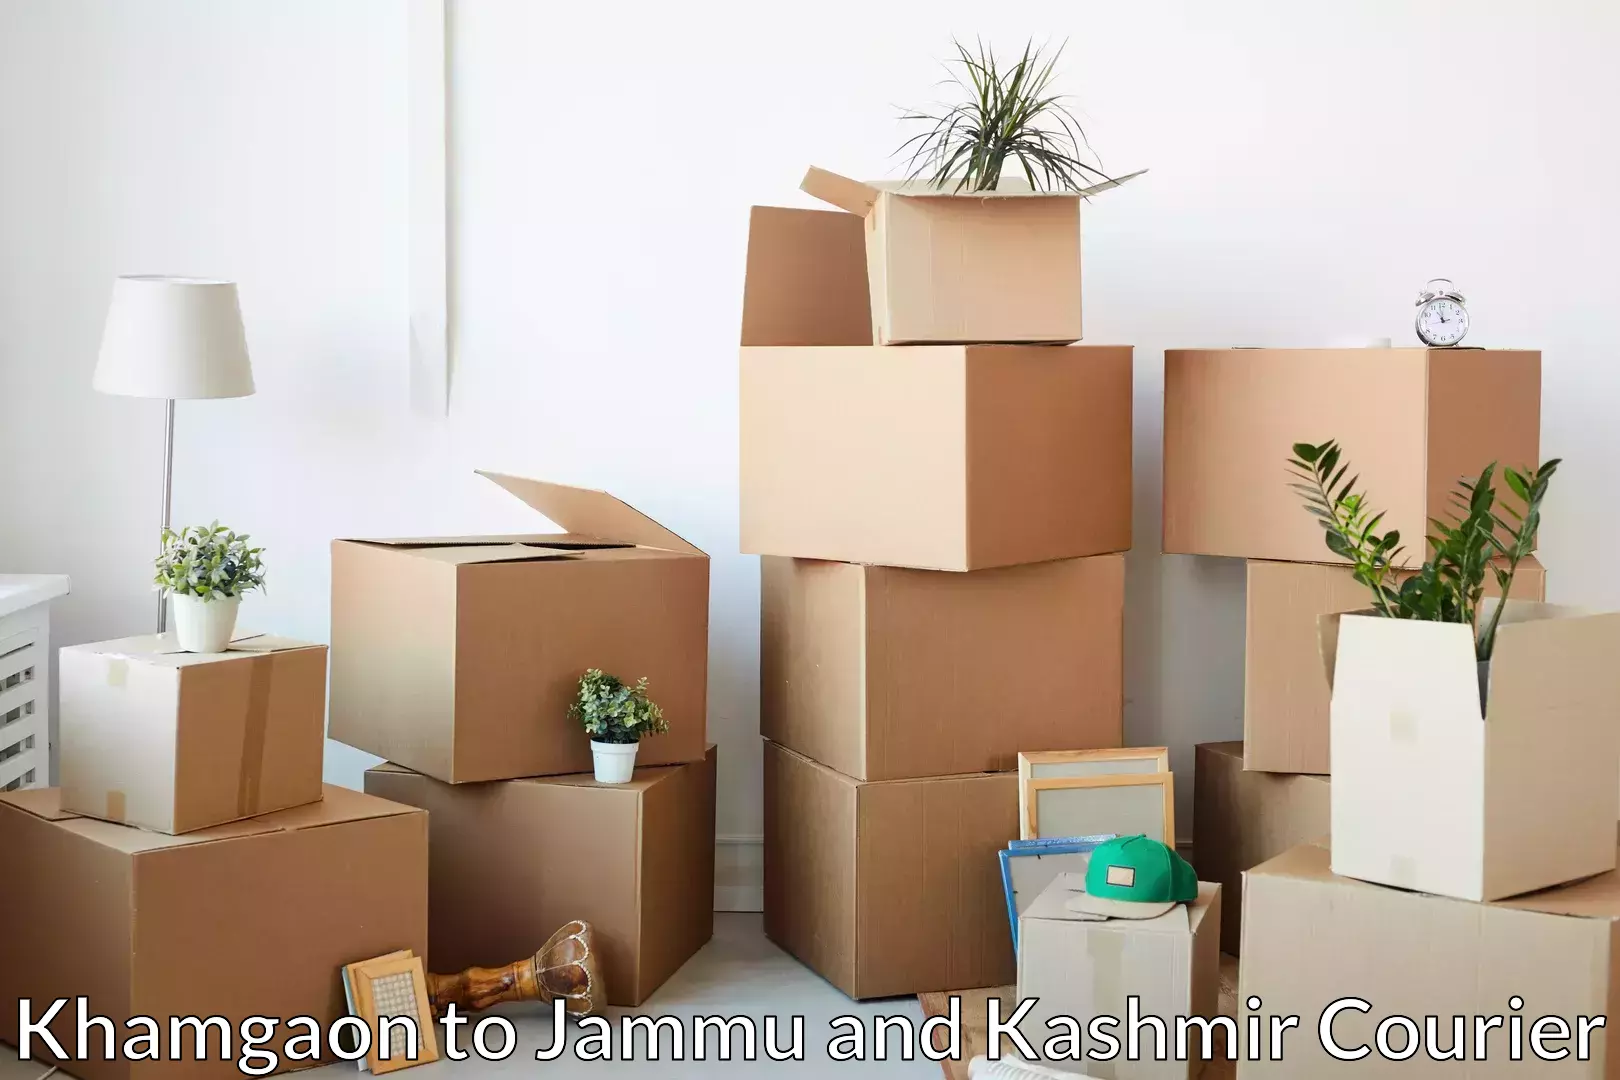 Professional packing services Khamgaon to Jammu and Kashmir